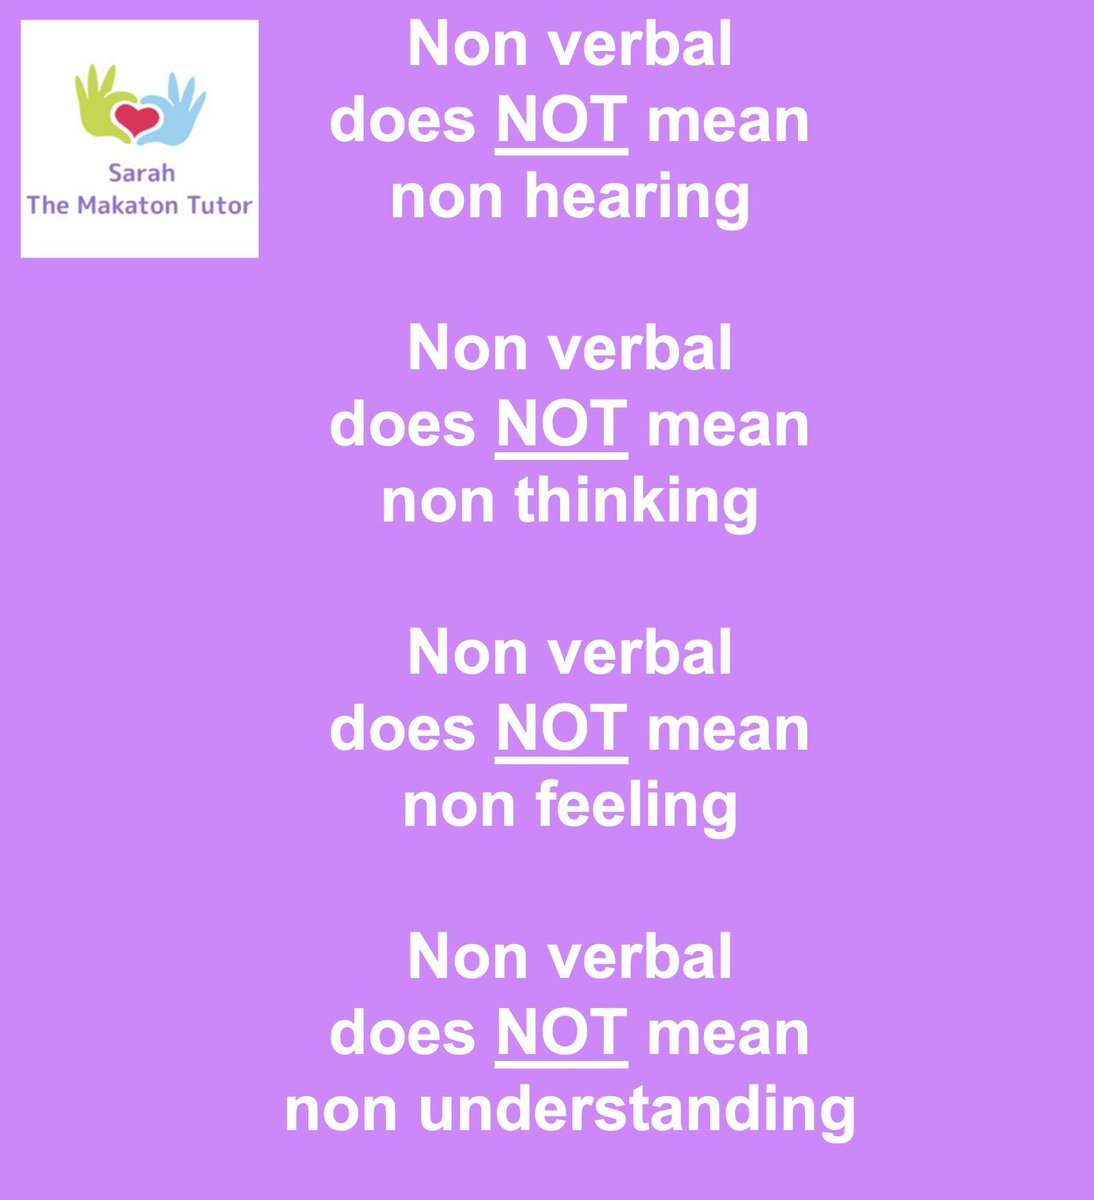 Remember that non verbal doesn’t mean you don’t have a voice.
There are others way to ‘talk’ that don’t have to be verbal.

#WeTalkMakaton
#WeUseMakatonWhatsYourSuperpower
#MakatonSymbols
#TotalCommunication
#AAC